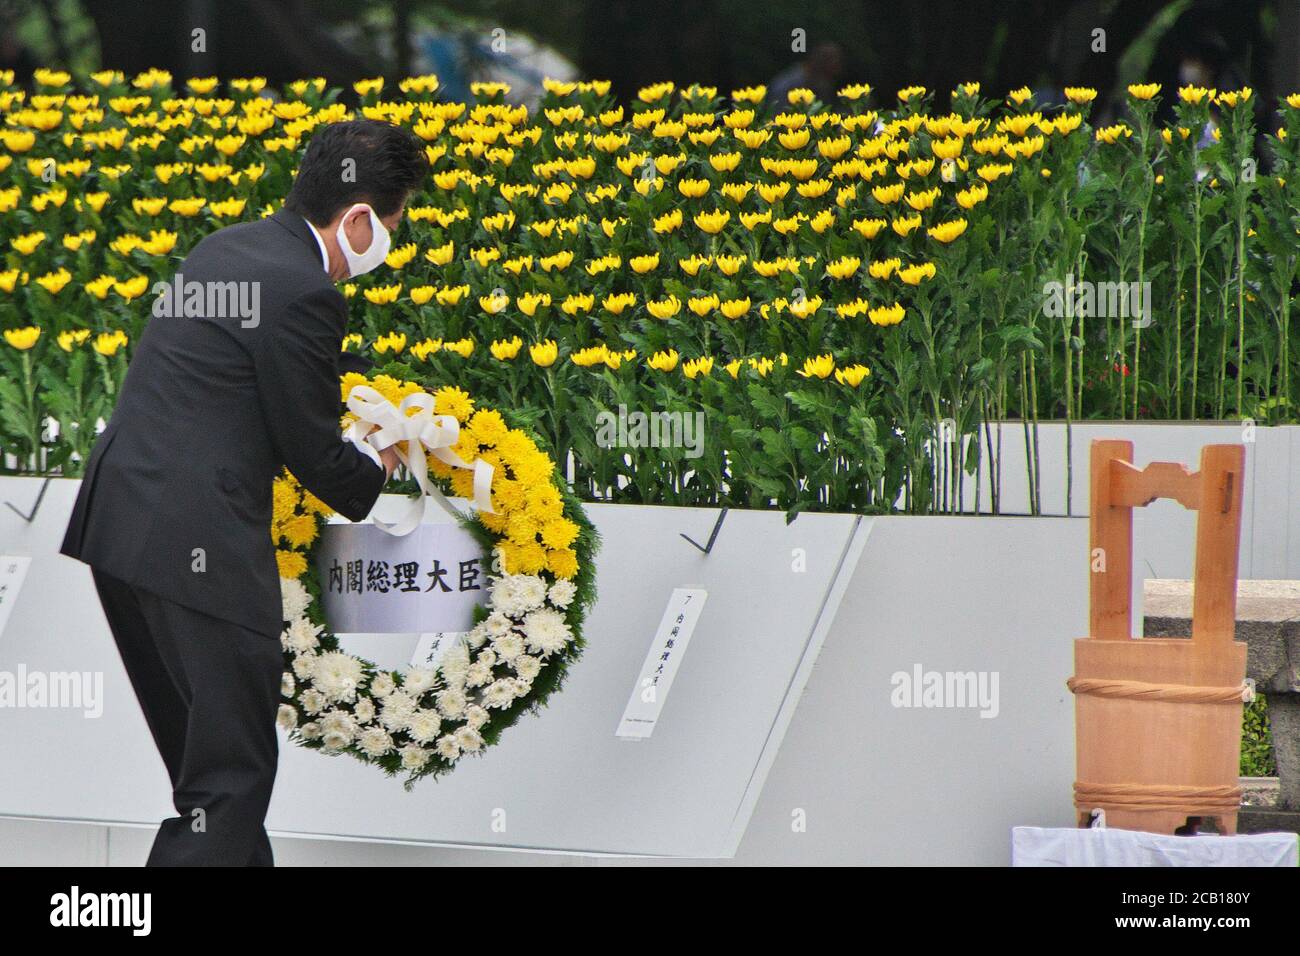 Japan's Prime Minister Shinzo Abe offers wreath during the ceremony of the 75th anniversary memorial service for atomic bomb victims at Hiroshima Peace Memorial Park in Hiroshima, Japan on August 6, 2020. (Photo by AFLO) Stock Photo